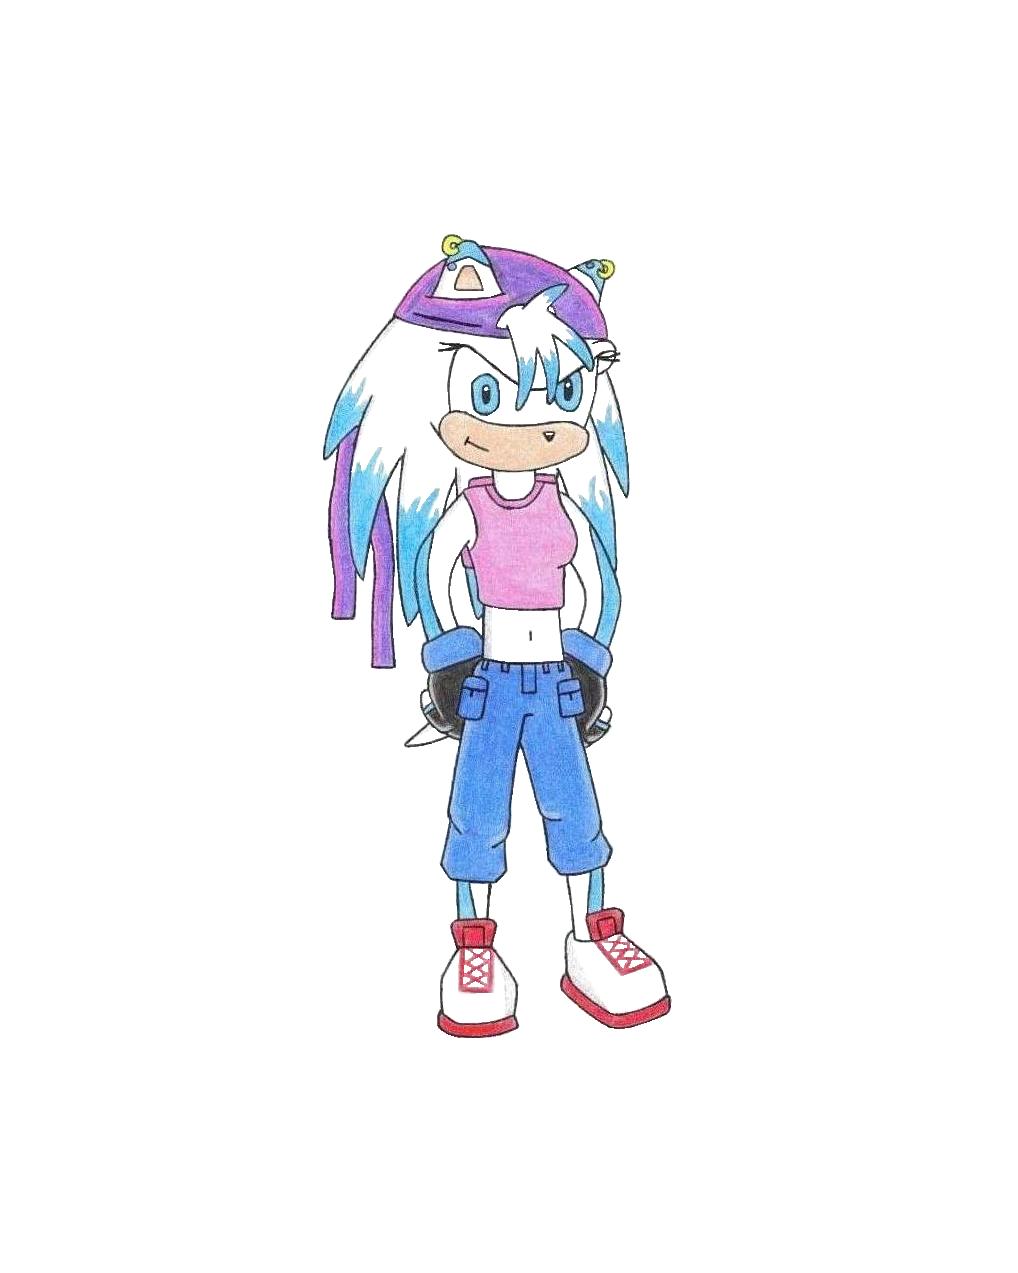 Twister the Hedgehog by Twister